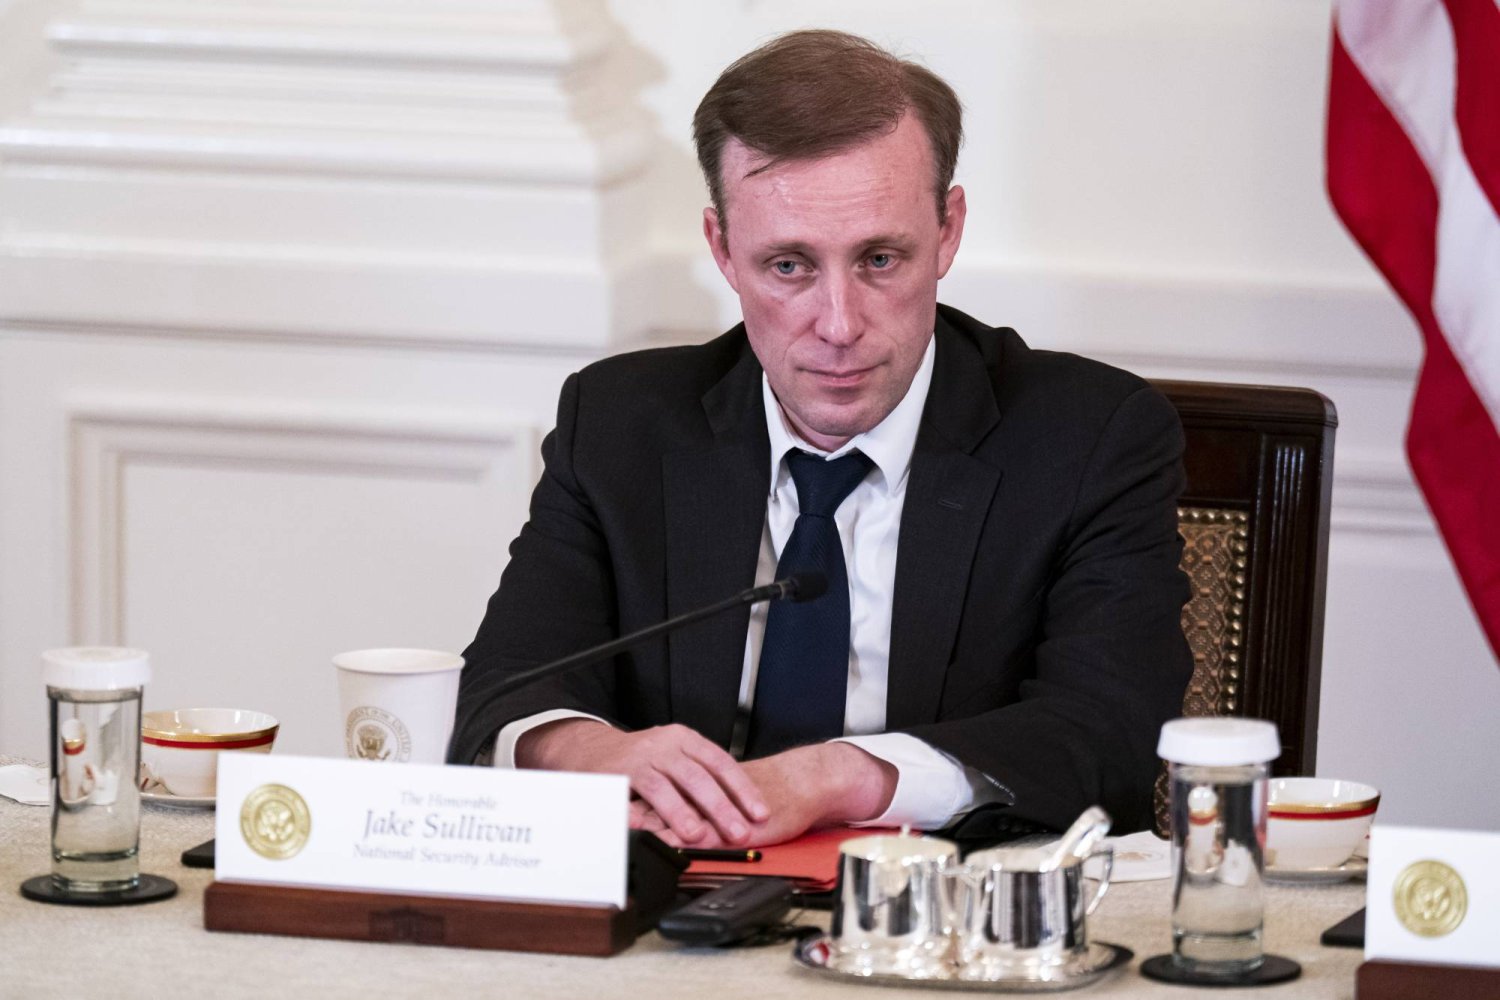 US national security adviser Jake Sullivan during a meeting in the East Room of the White House in Washington, DC, USA, on 11 April 2024. EPA/Al Drago / POOL